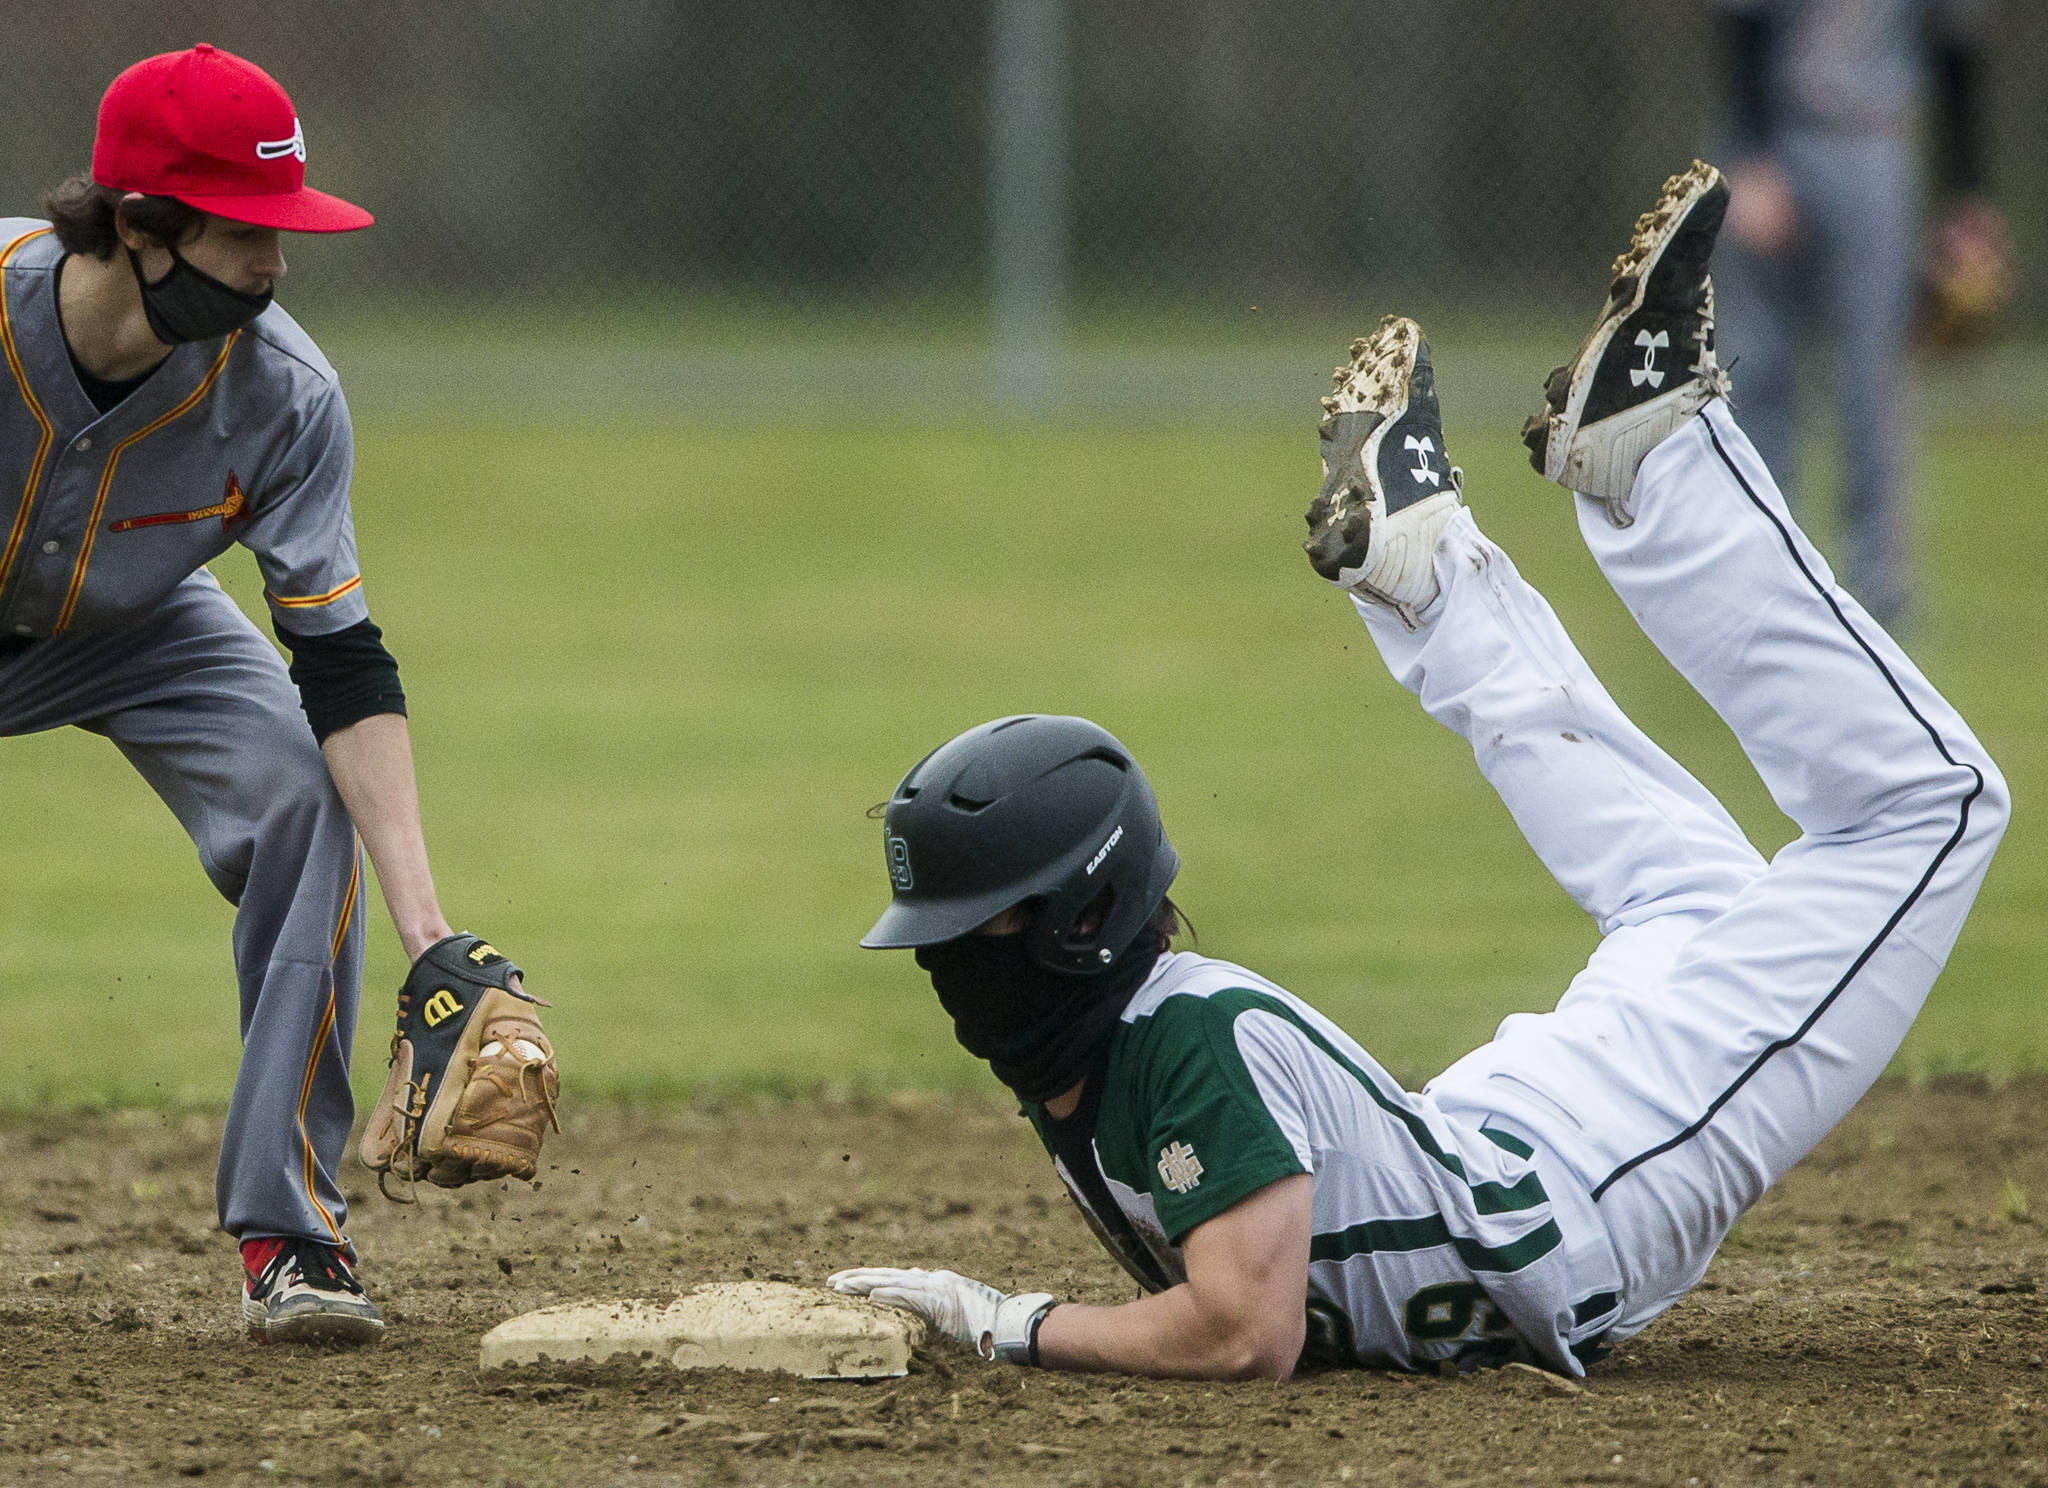 Marysville Getchell’s Bradley Aasen (right) slides into second base as Marysville Pilchuck’s Alex Smith reaches to tag him during a game on April 7, 2021, in Marysville. (Olivia Vanni / The Herald)